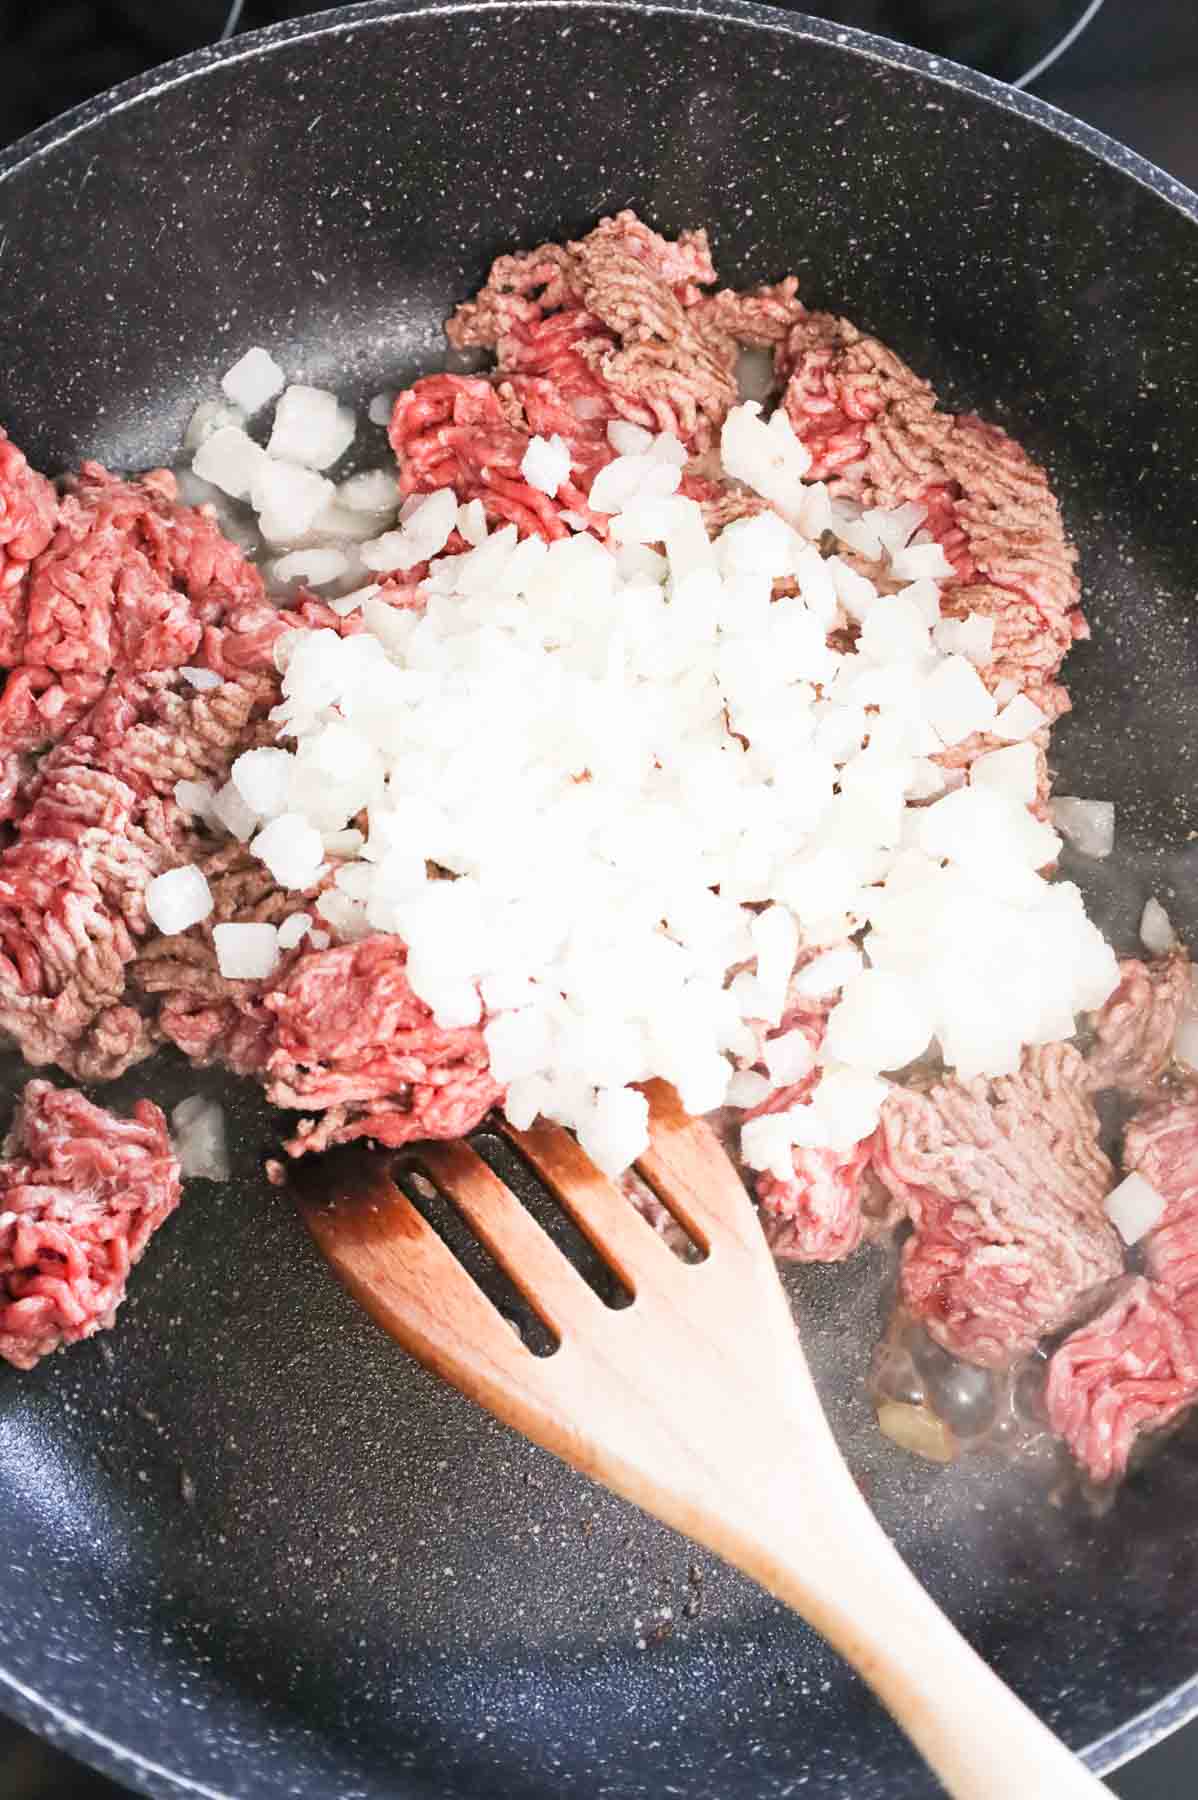 diced onions on top of ground beef cooking in a skillet